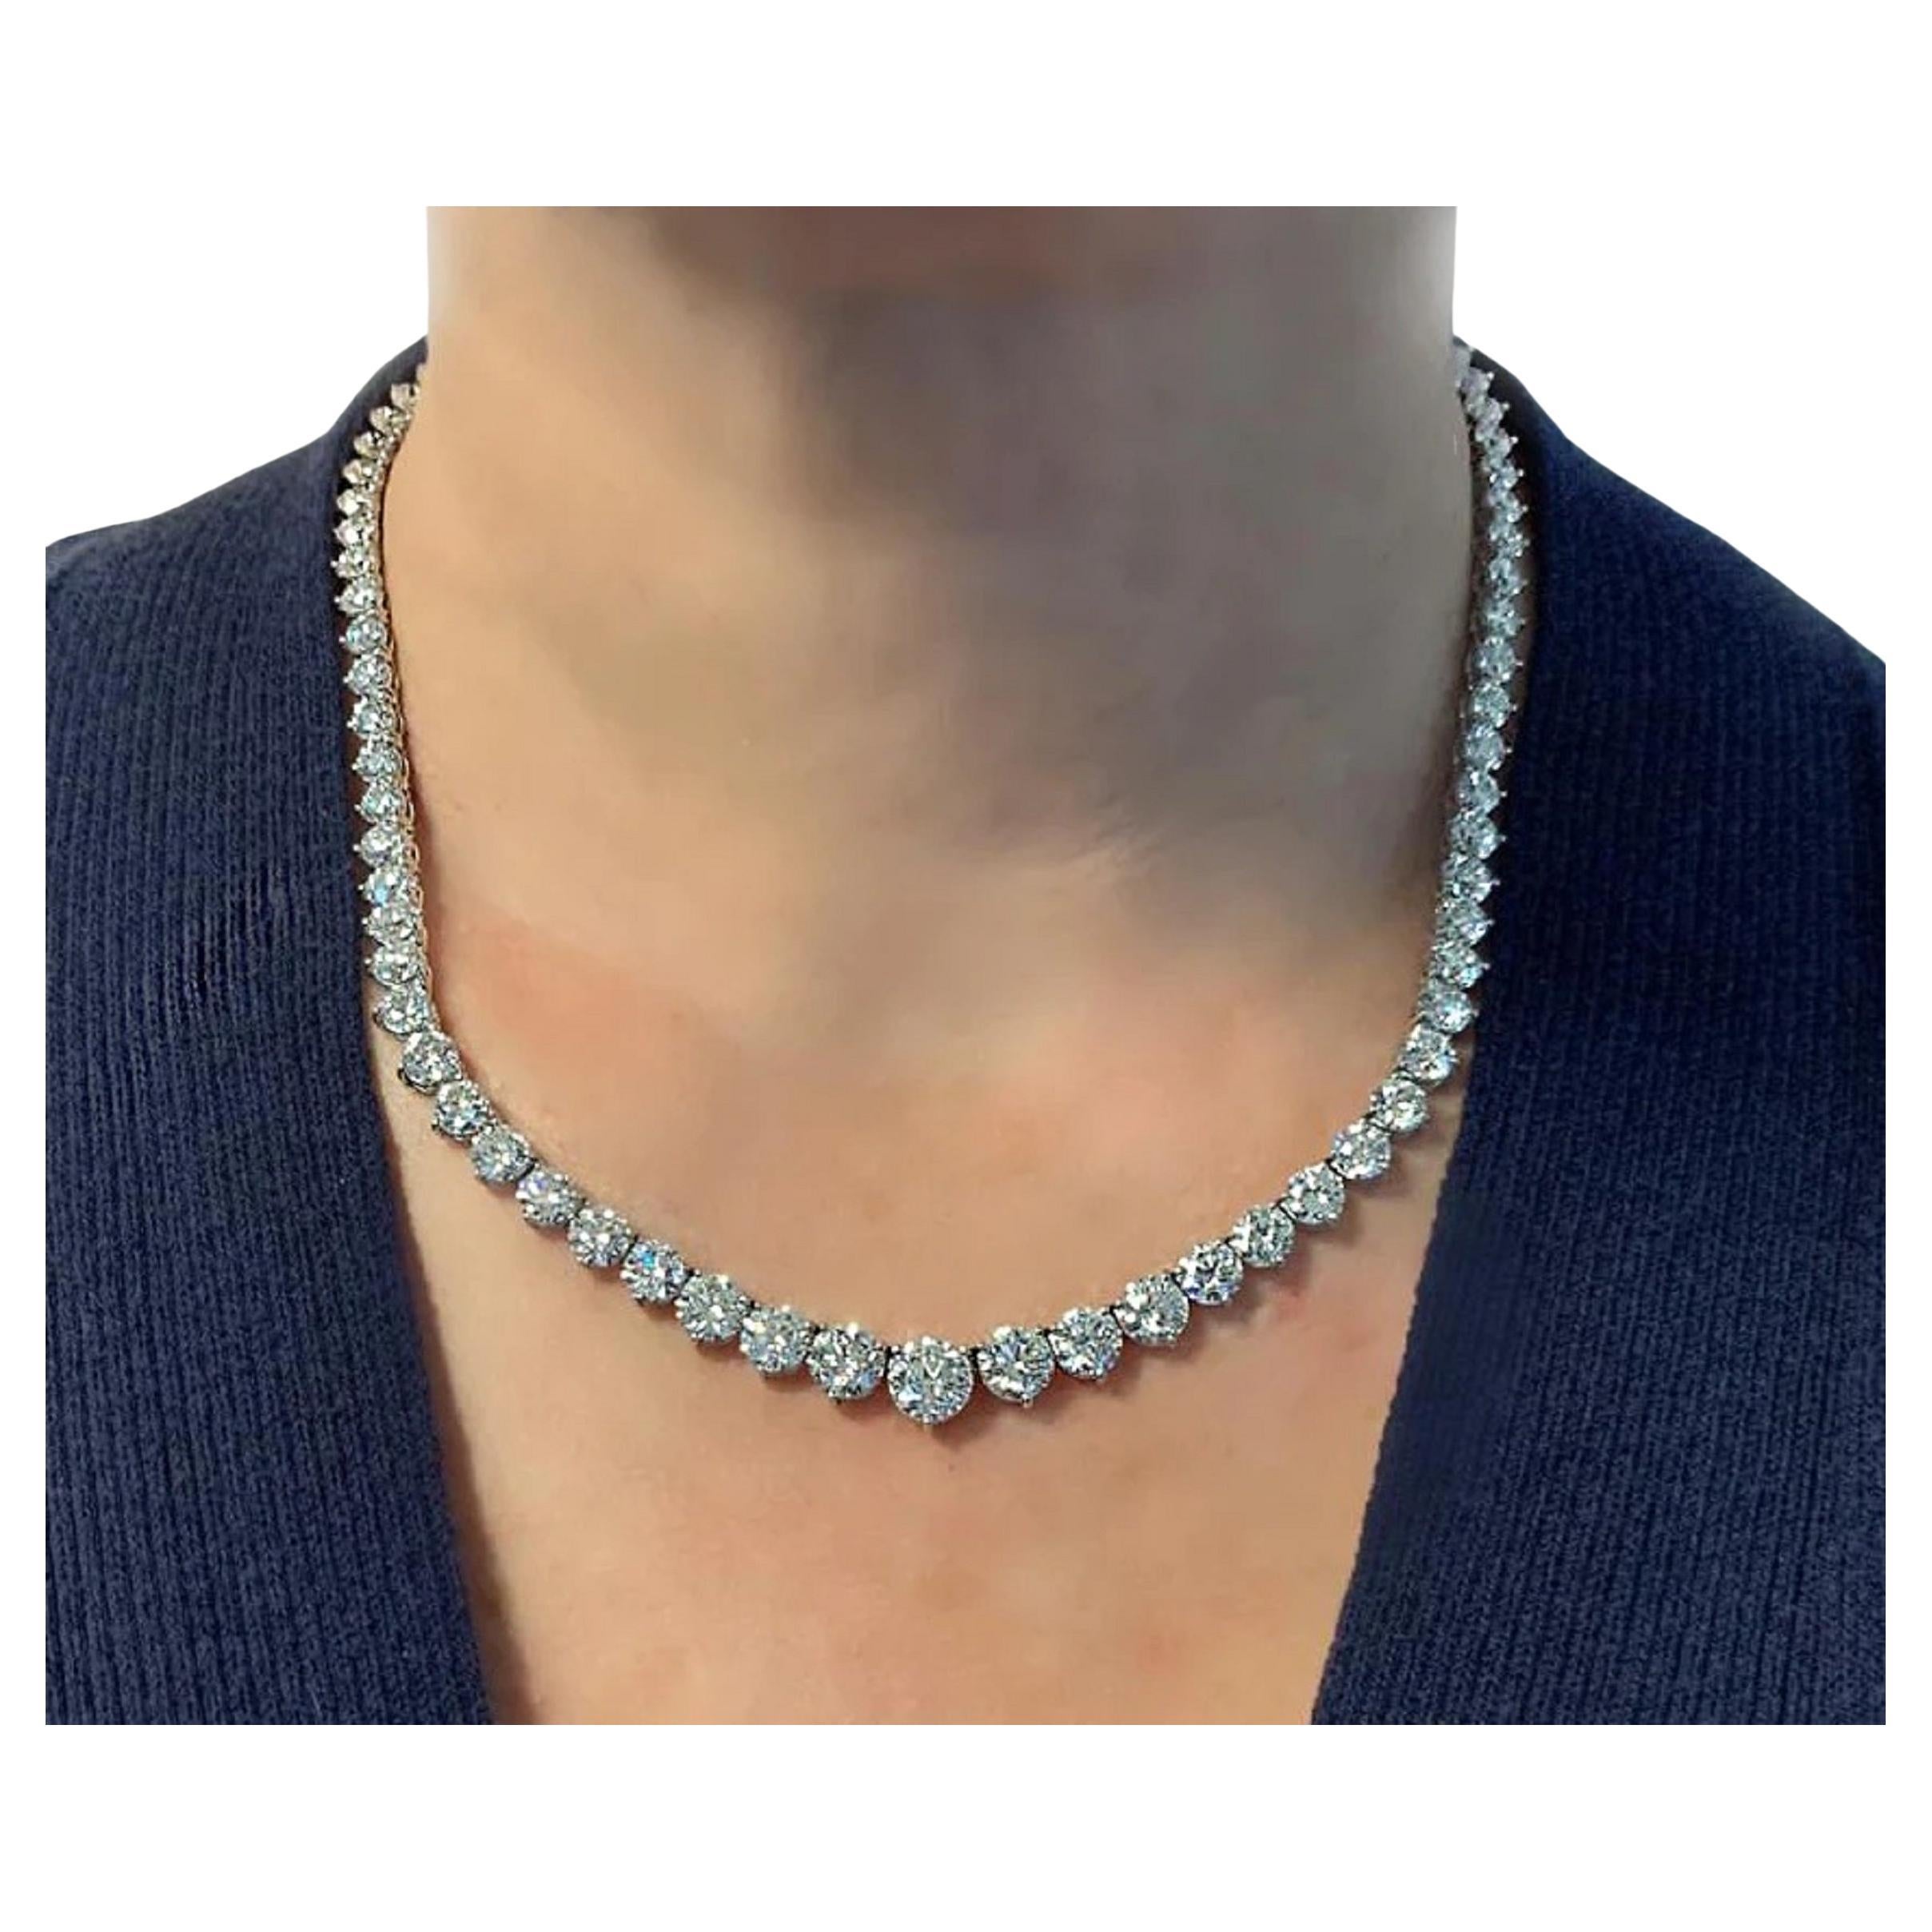 An exquisite riviera necklace of 20 carats
